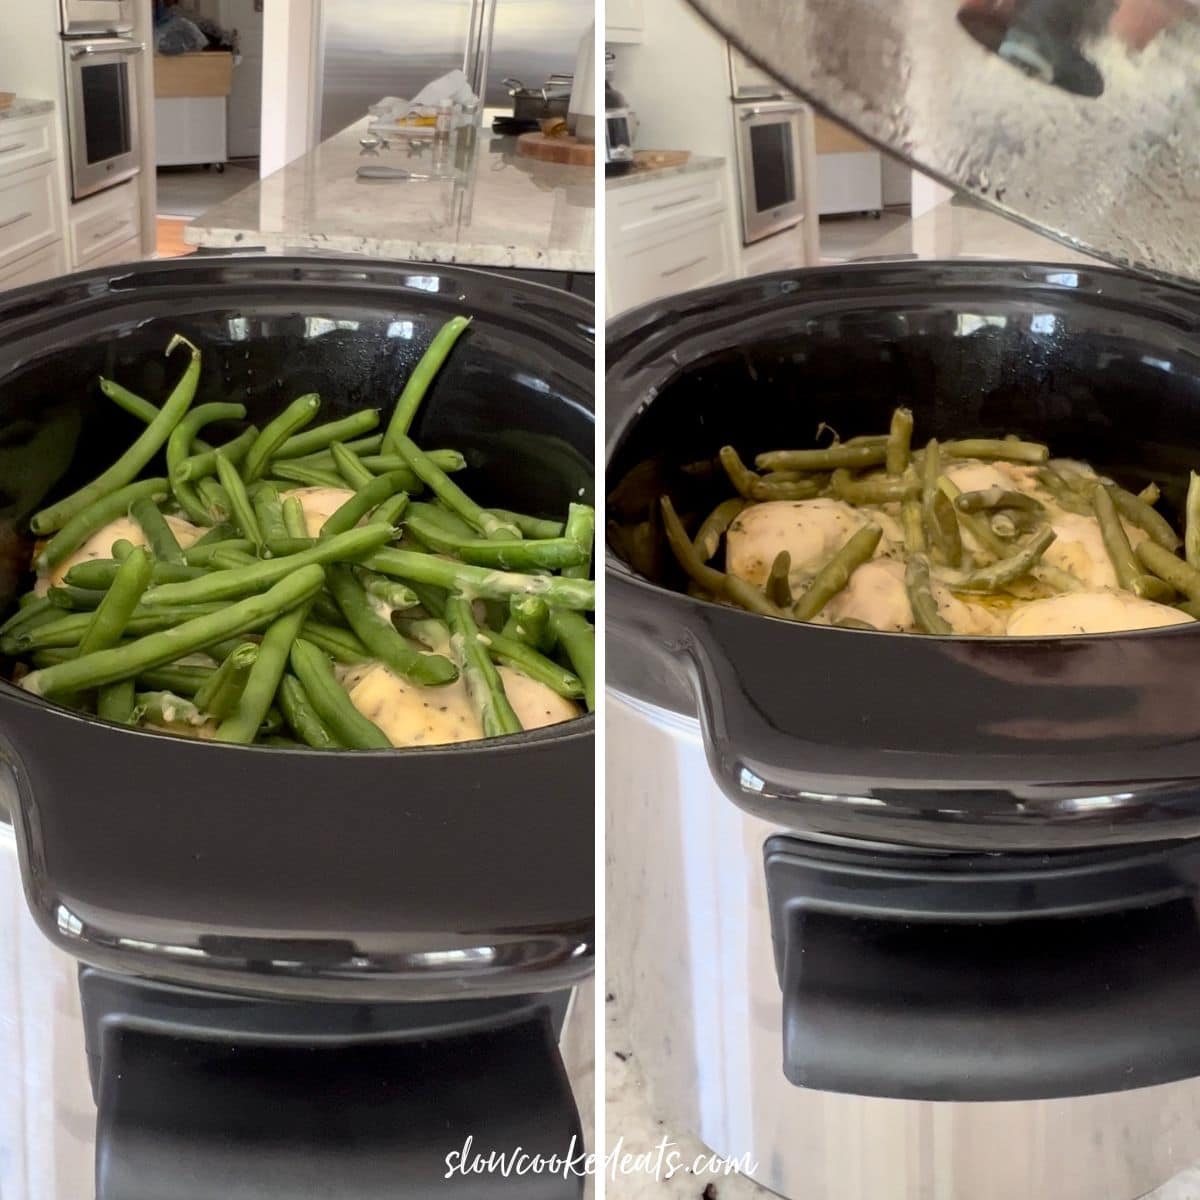 Adding green beans to the slow cooker.